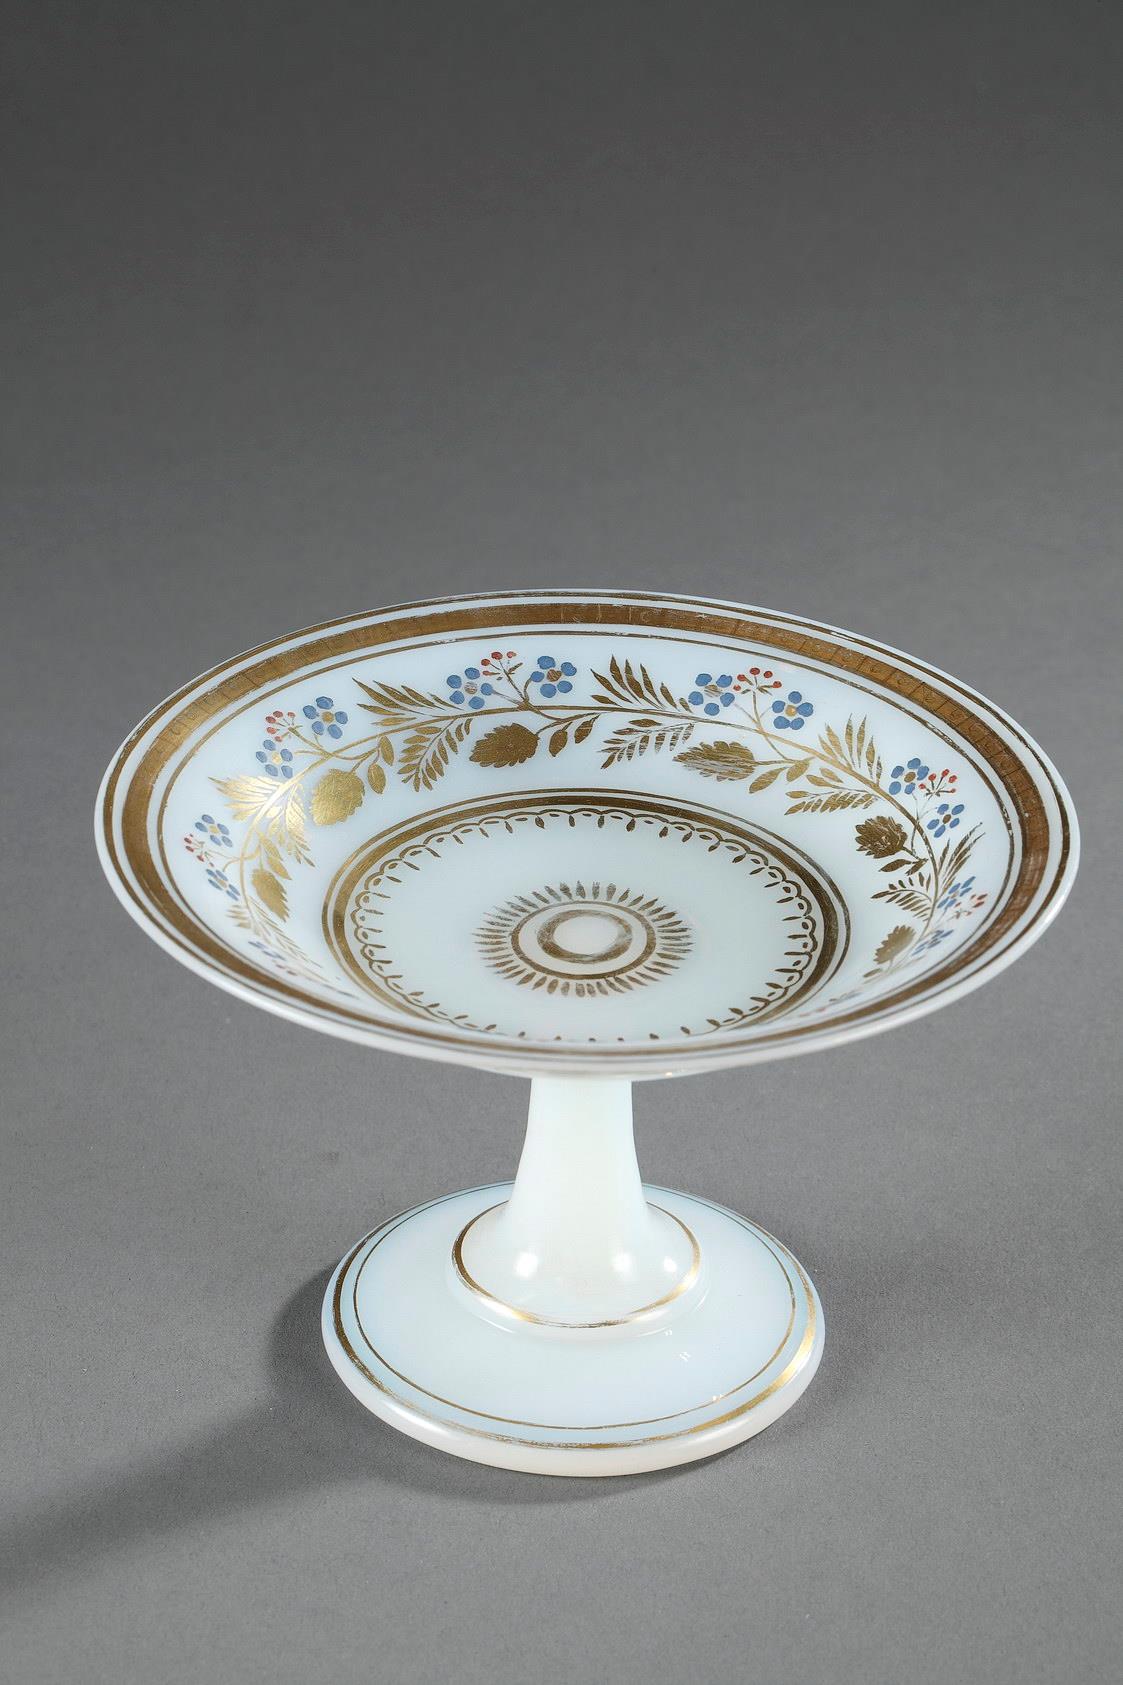 coupe, opaline, crystal, opale, glass, white, Charles, X, Restauration, 19th, century, gold, floral, forget-me-nots, rose, perfum, Jean-Baptiste, Desvignes, savonneux, polychrome